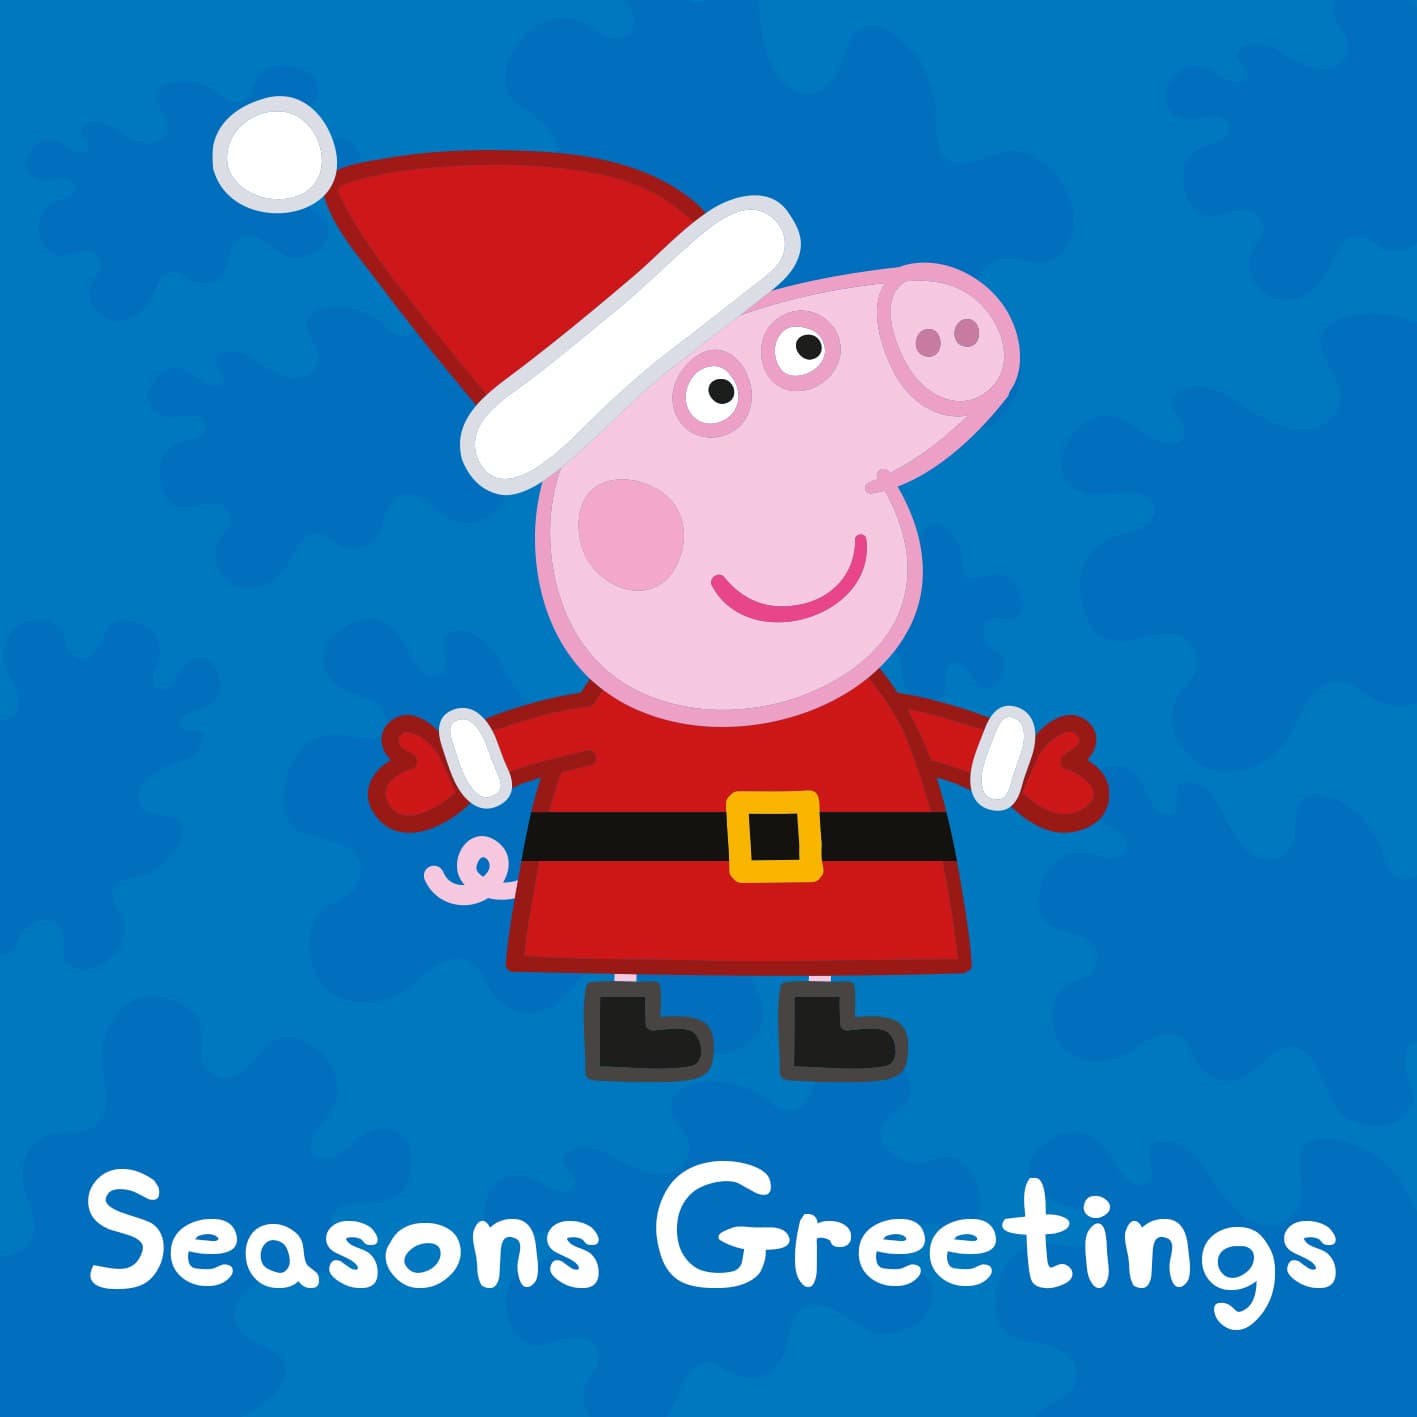 Choose Brigit's Bakery for the best experience days in London Peppa Pig Christmas Bus Tour